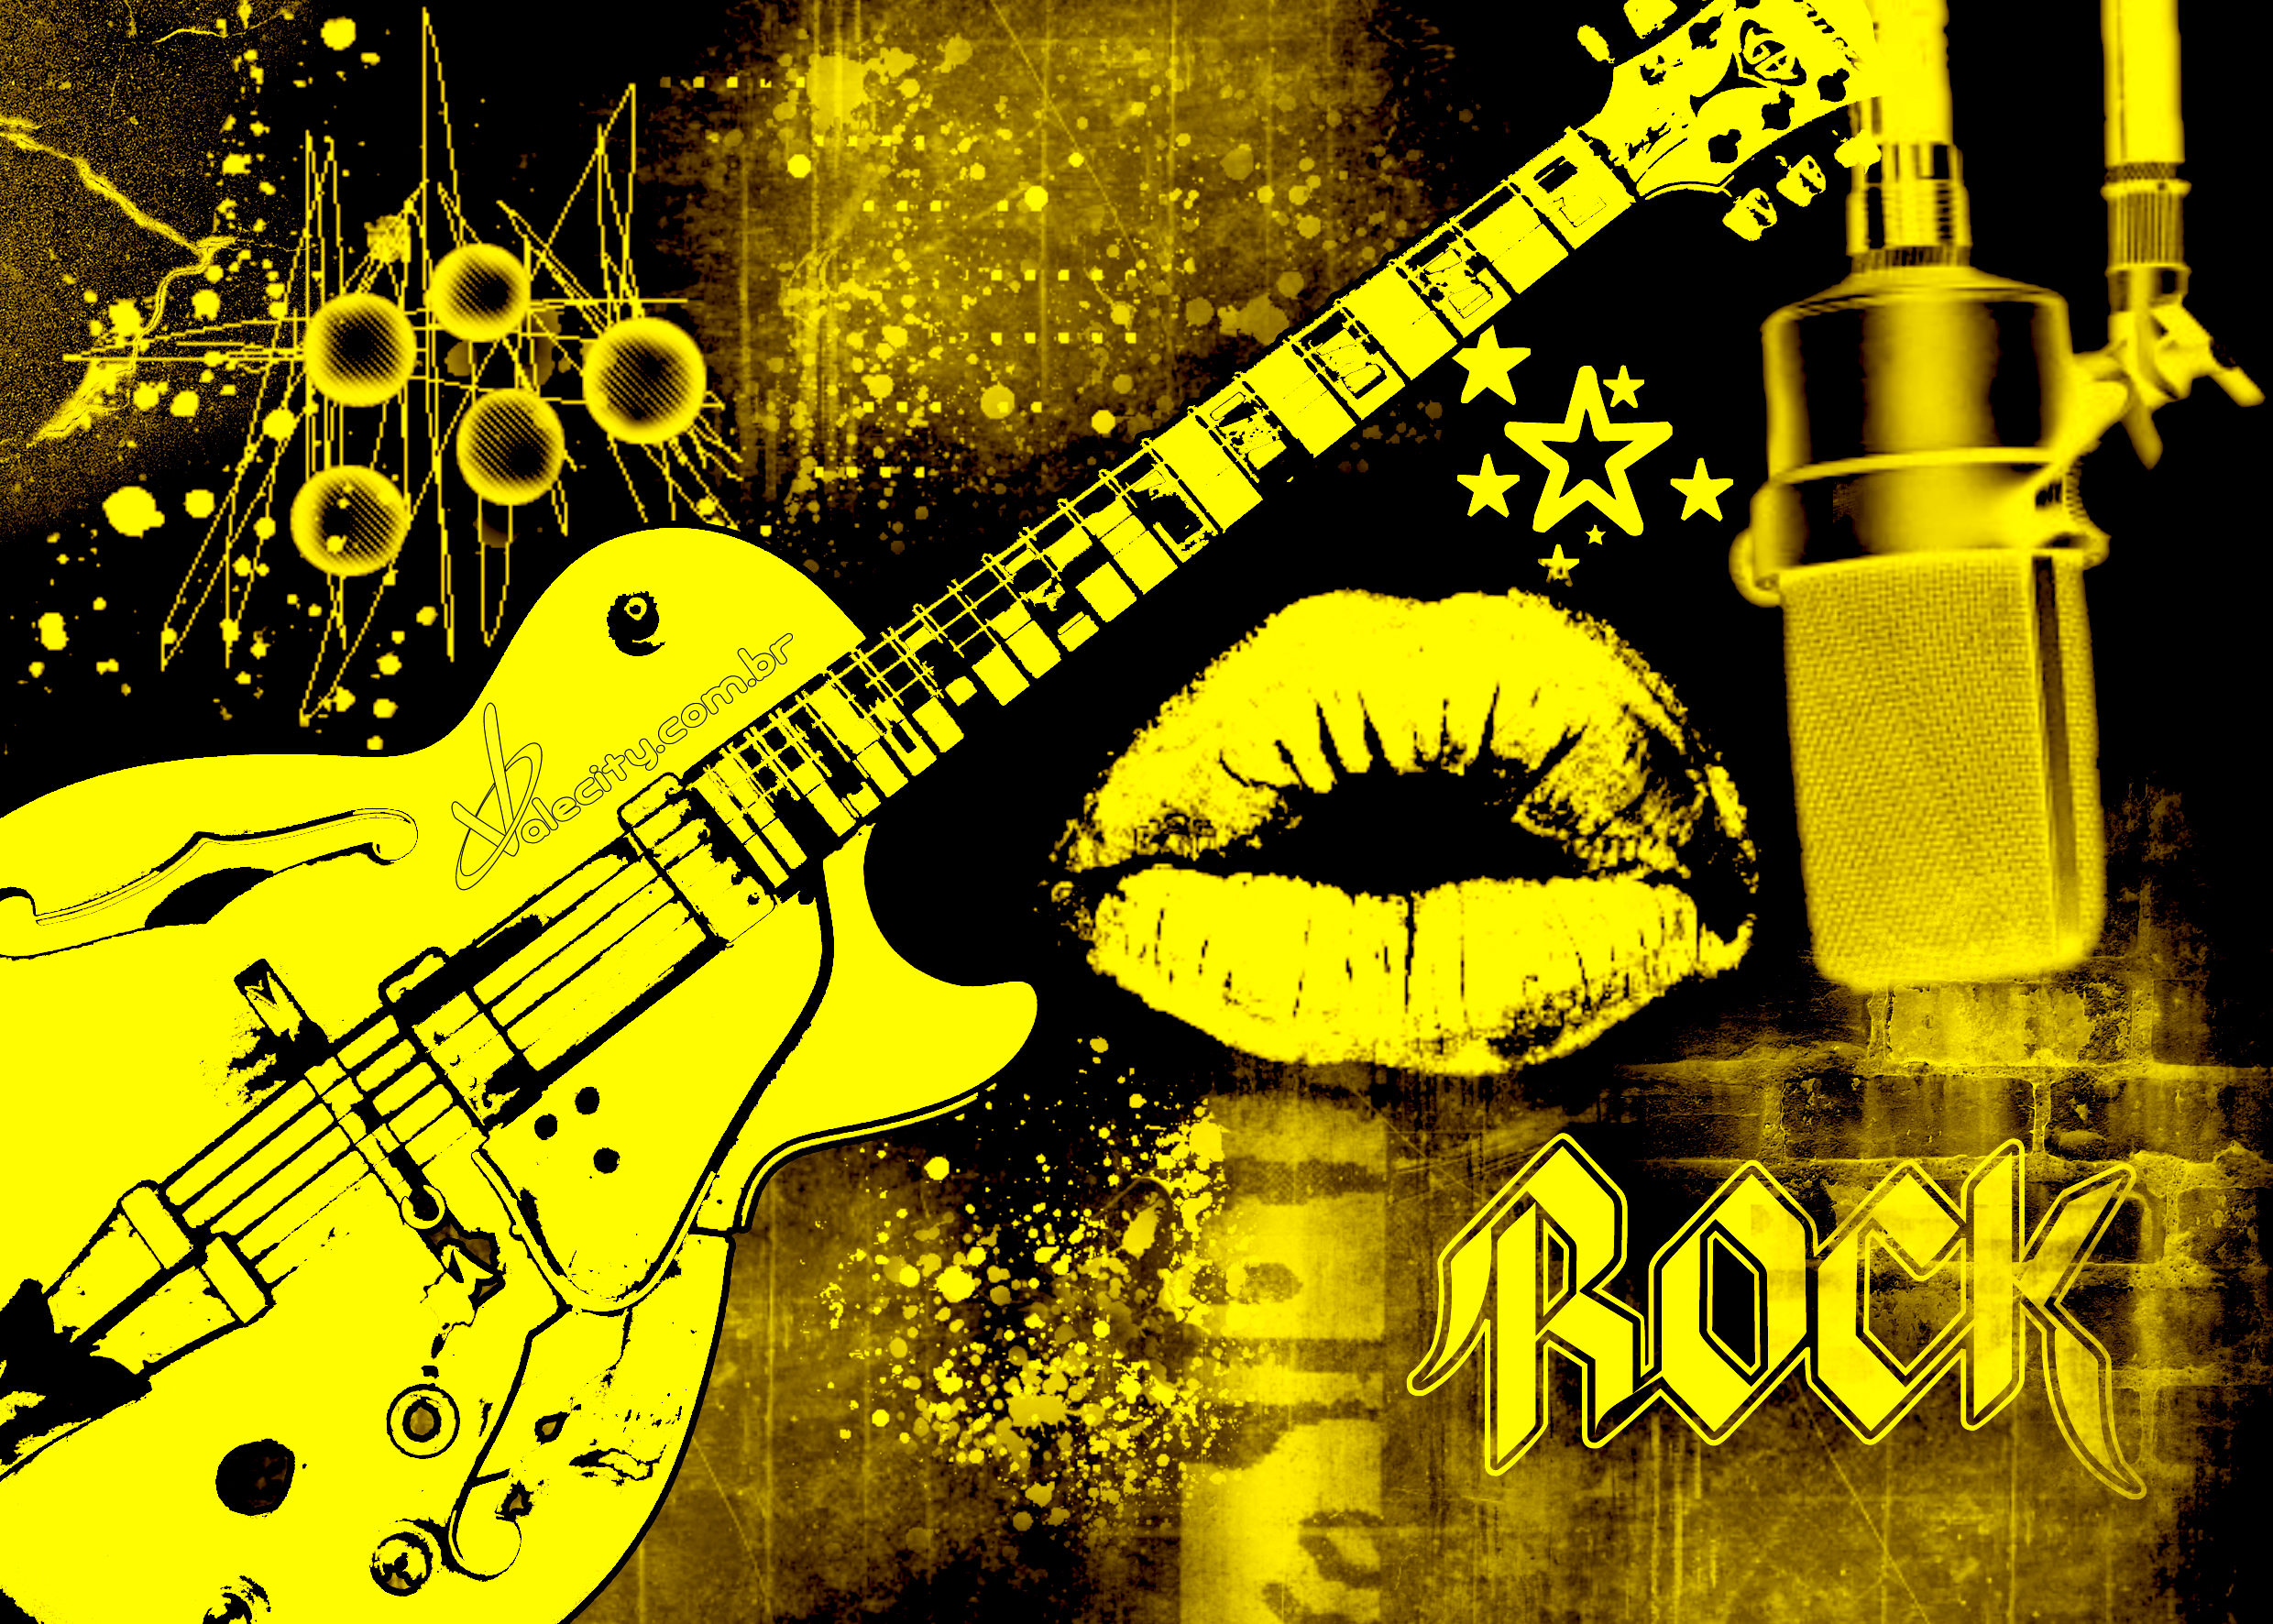 8 Rock HD Wallpapers Backgrounds